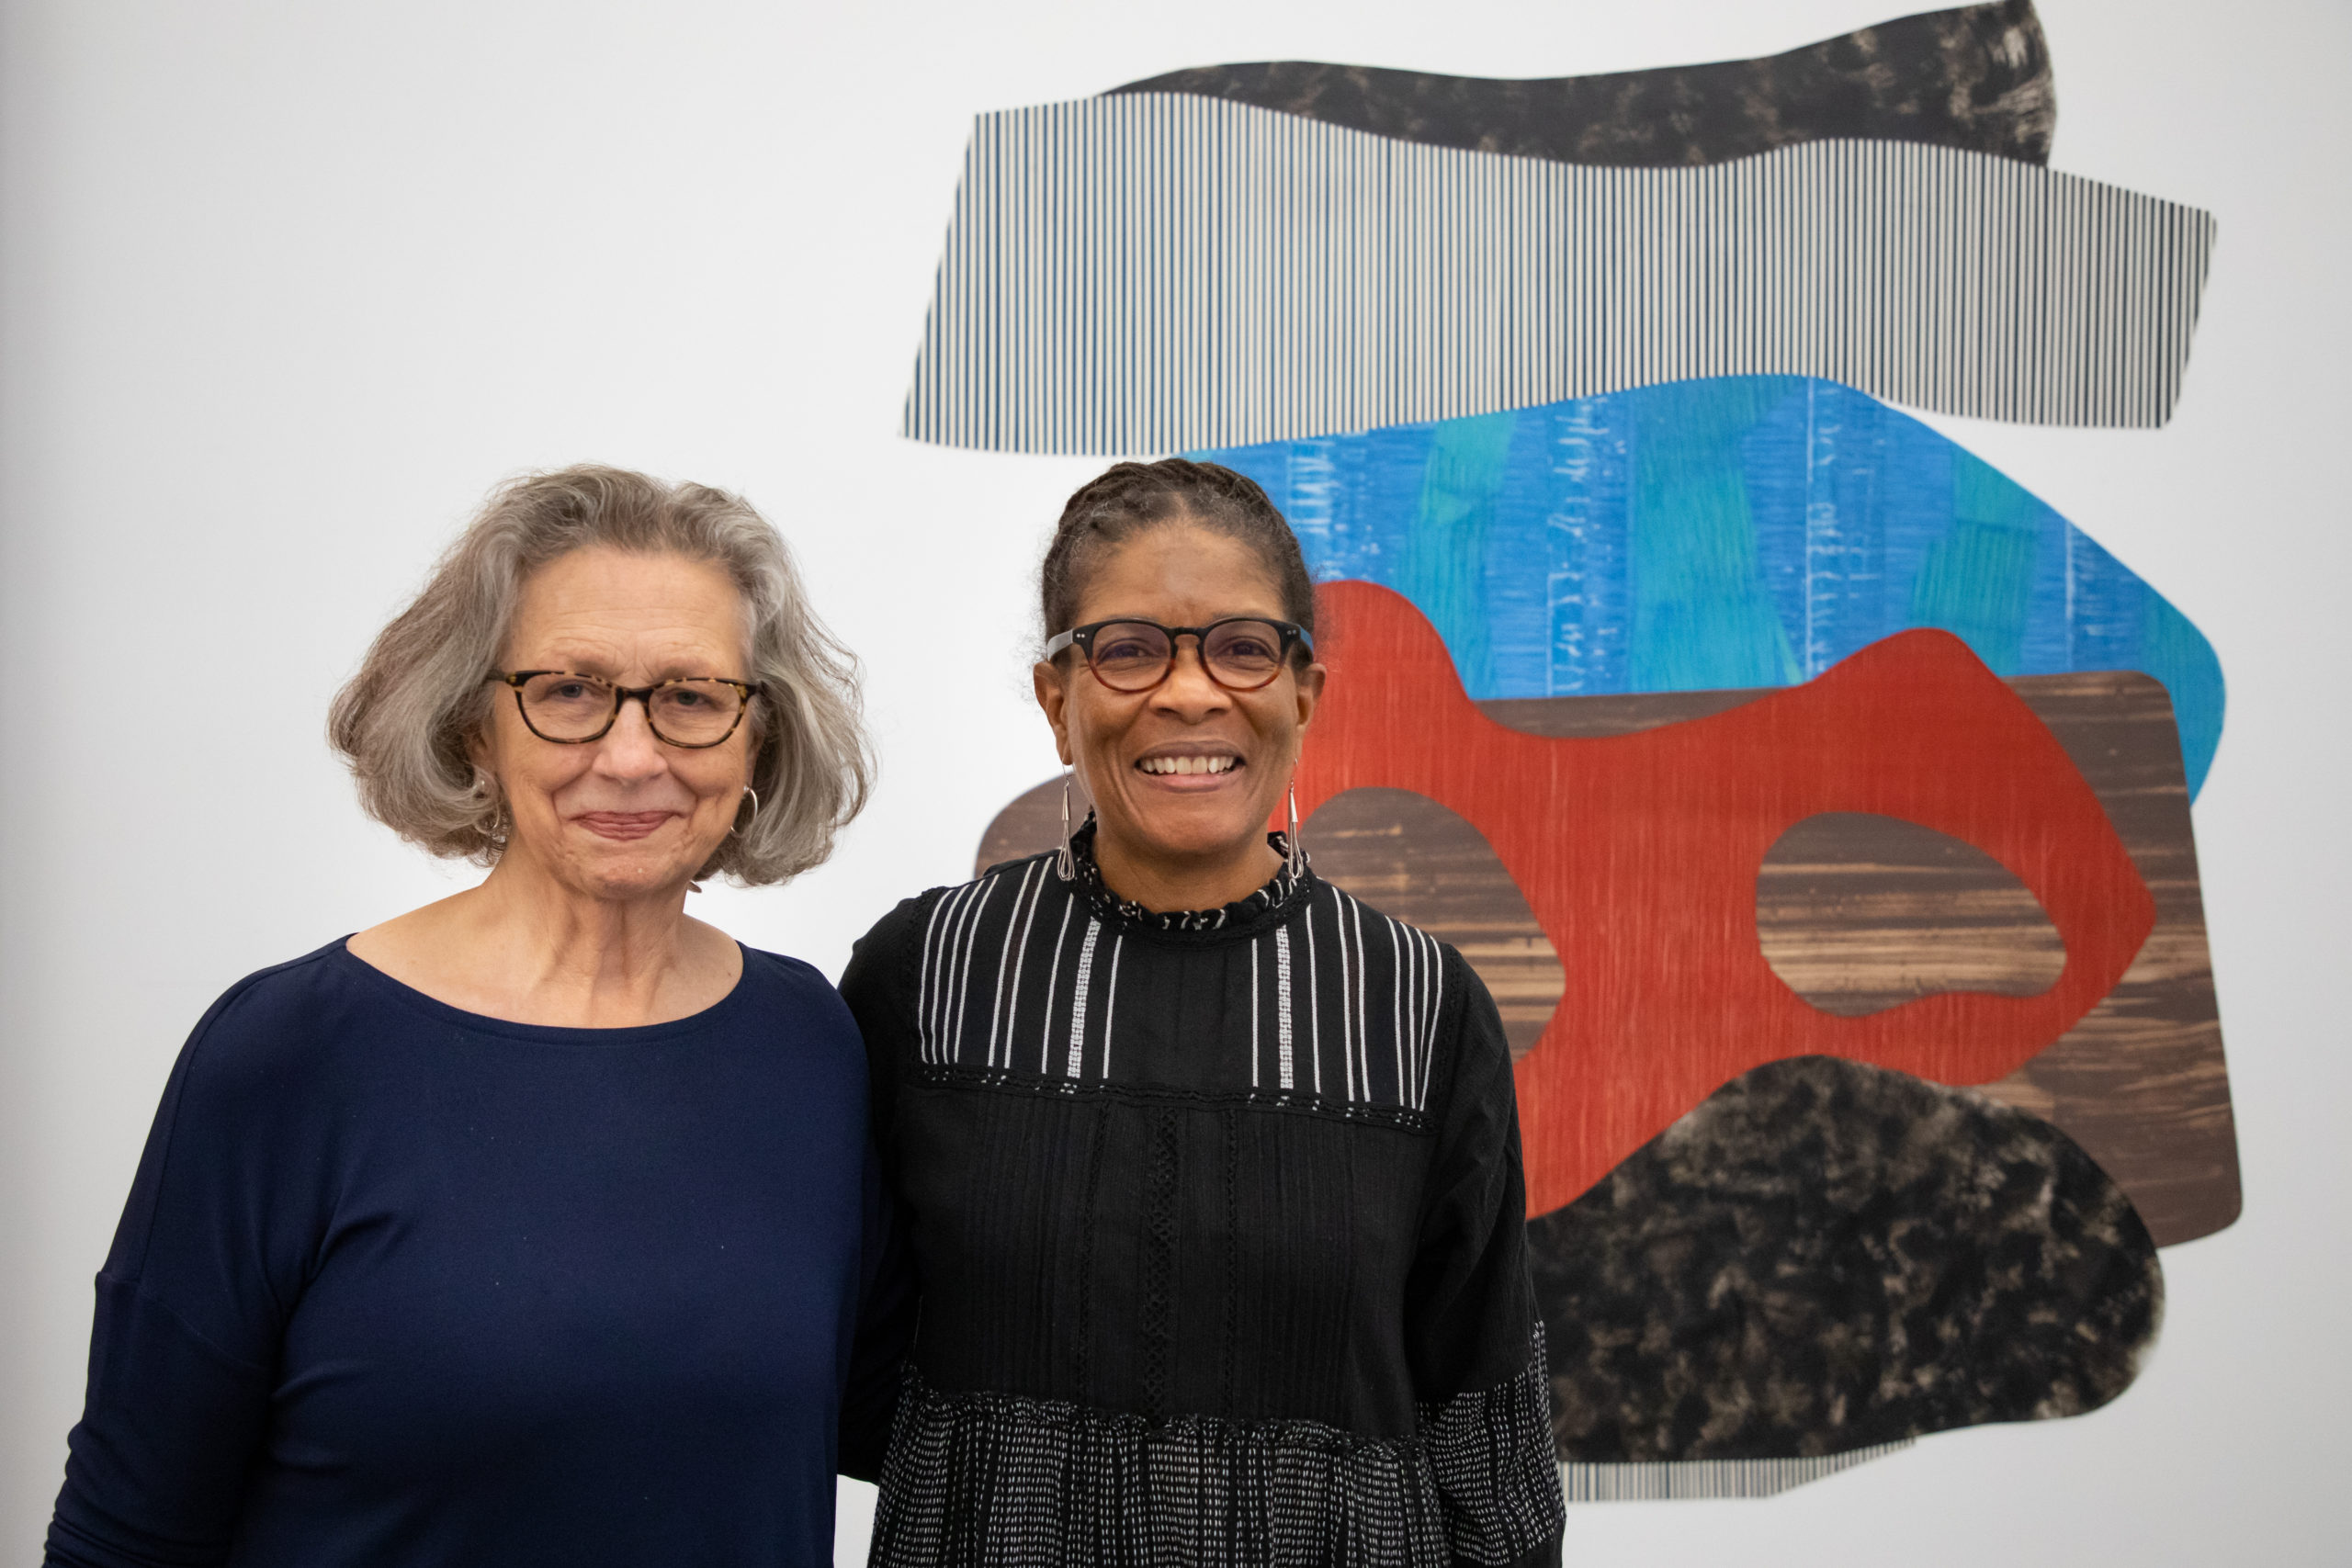 Curator Alicia G. Longwell with artist Nanette Carter at the opening of 